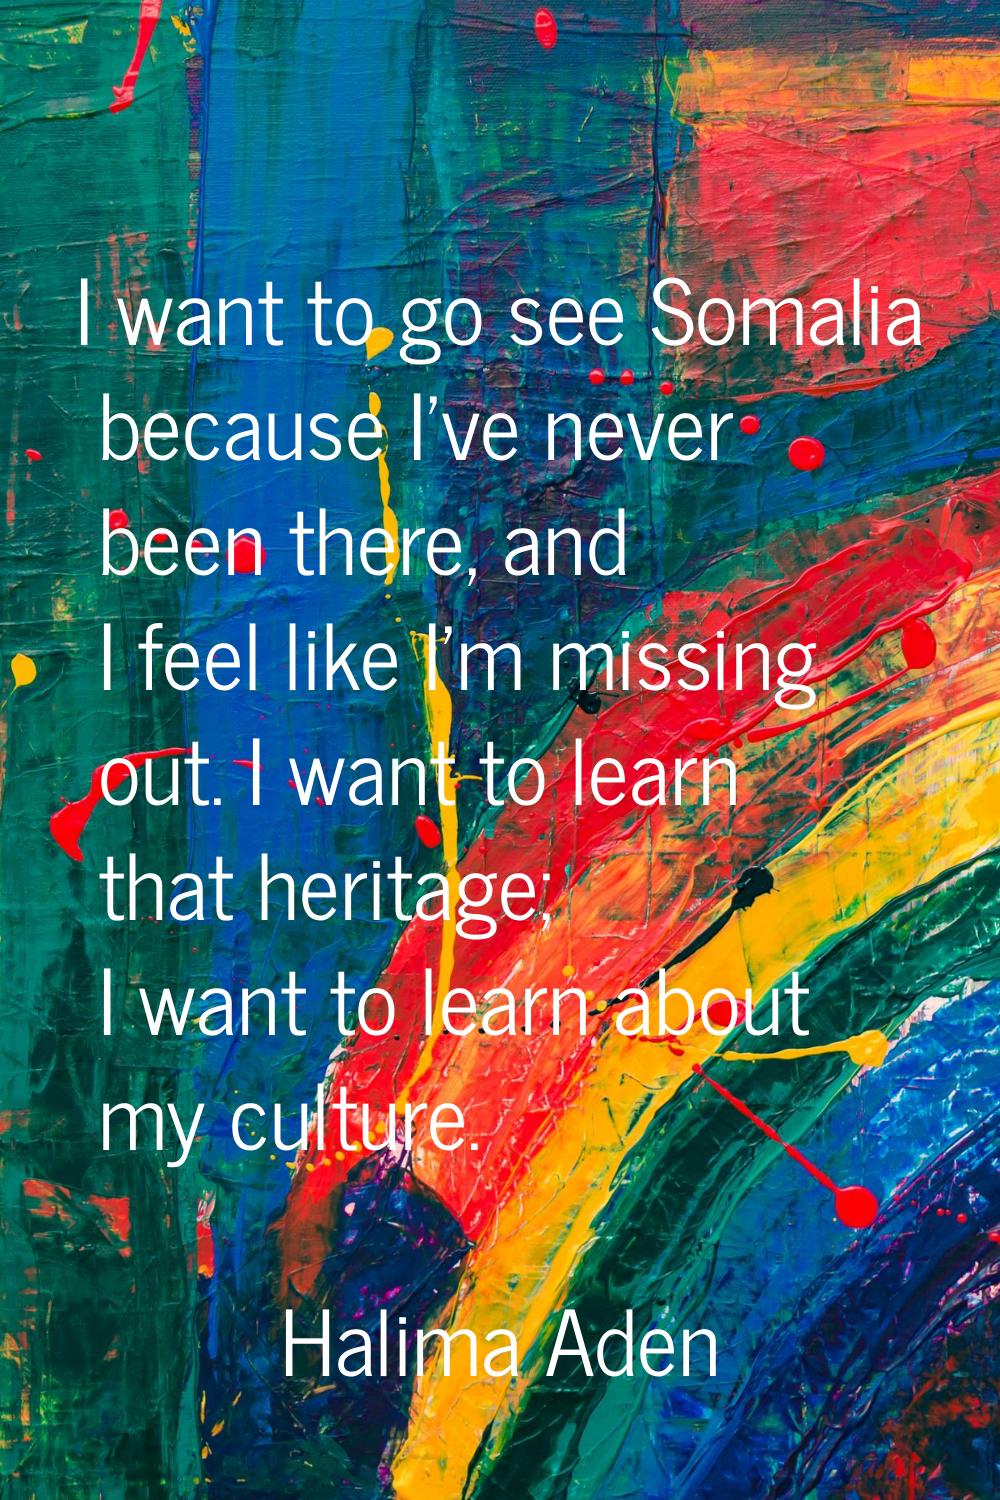 I want to go see Somalia because I've never been there, and I feel like I'm missing out. I want to 